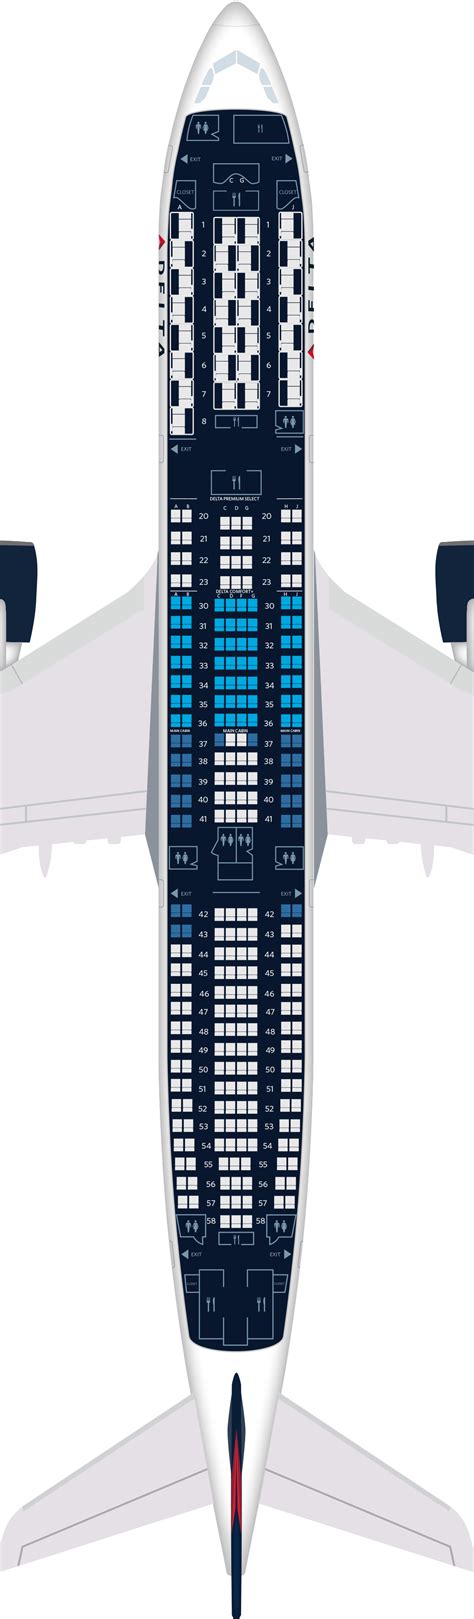 Airbus A330 900neo Seat Maps Specs And Amenities Delta Air Lines